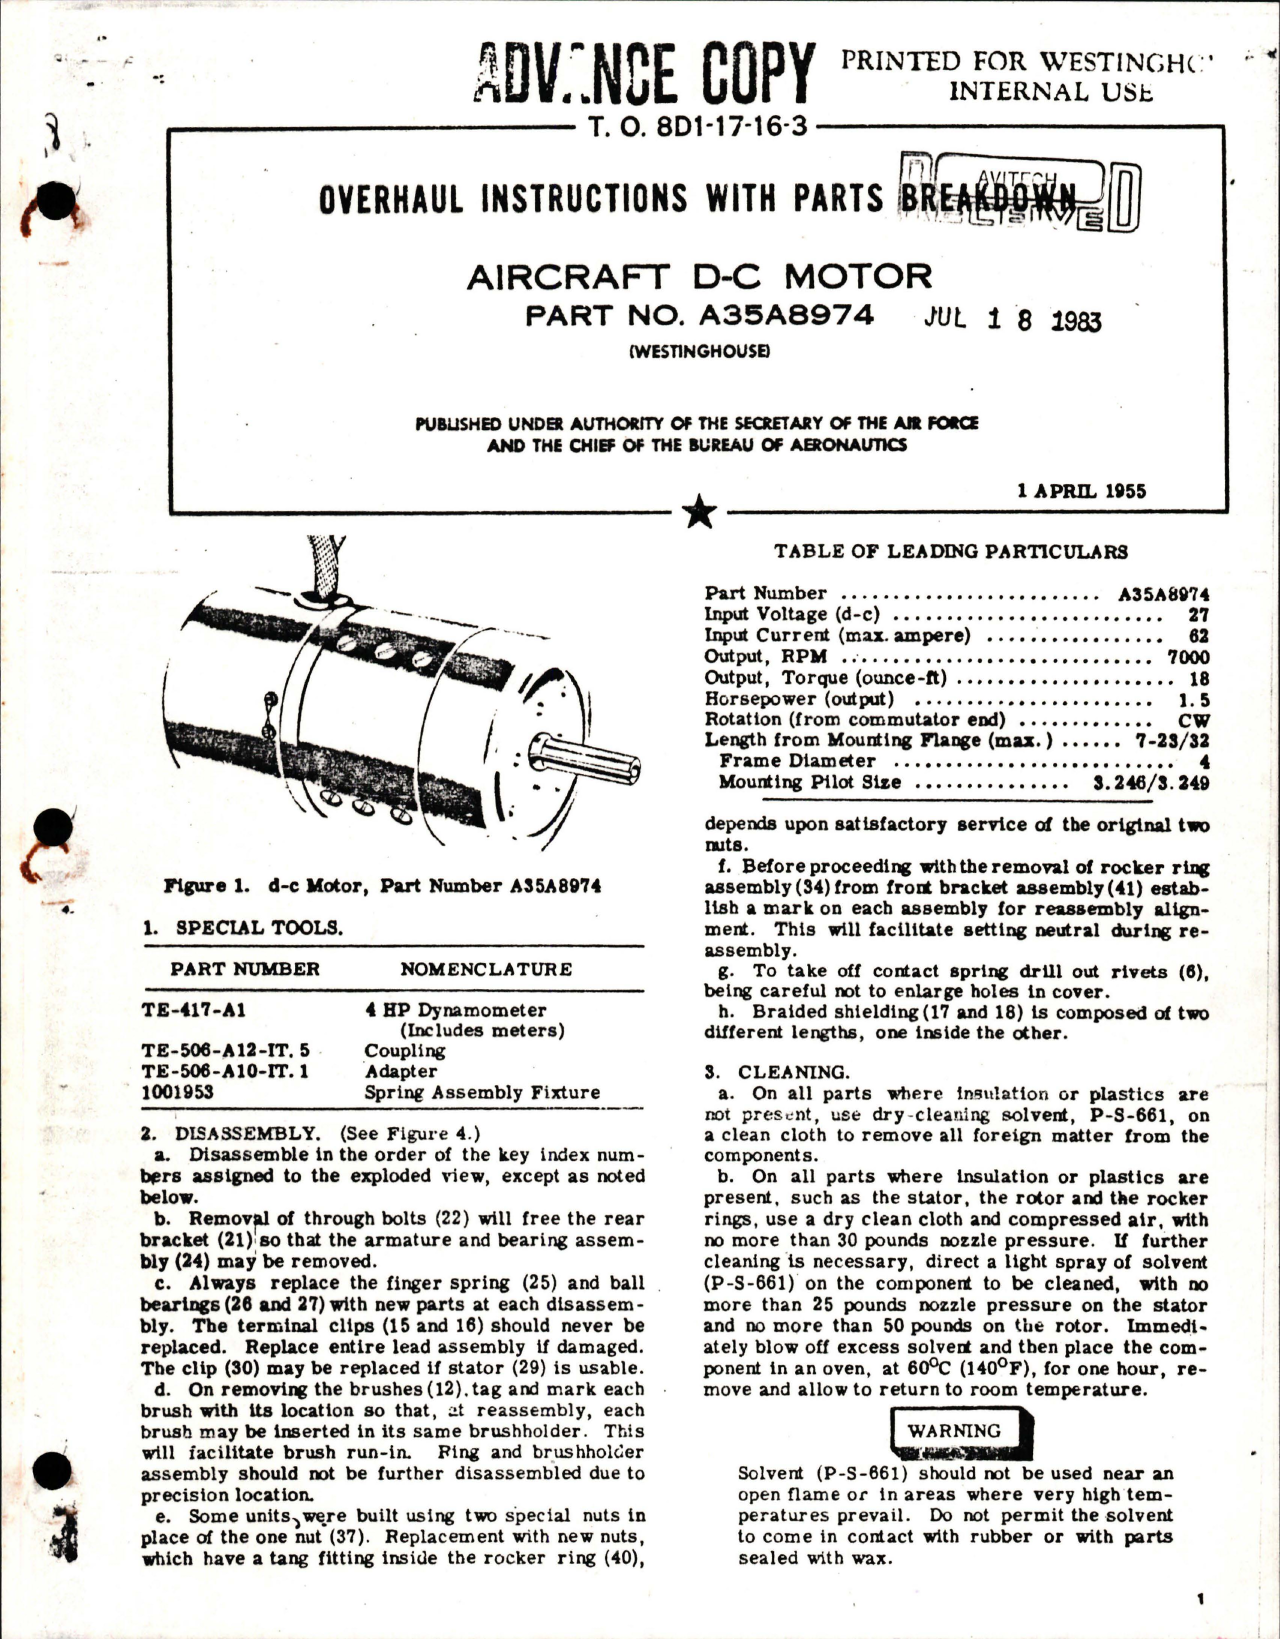 Sample page 1 from AirCorps Library document: Overhaul Instructions with Parts Breakdown for DC Motor - Part A35A8974 